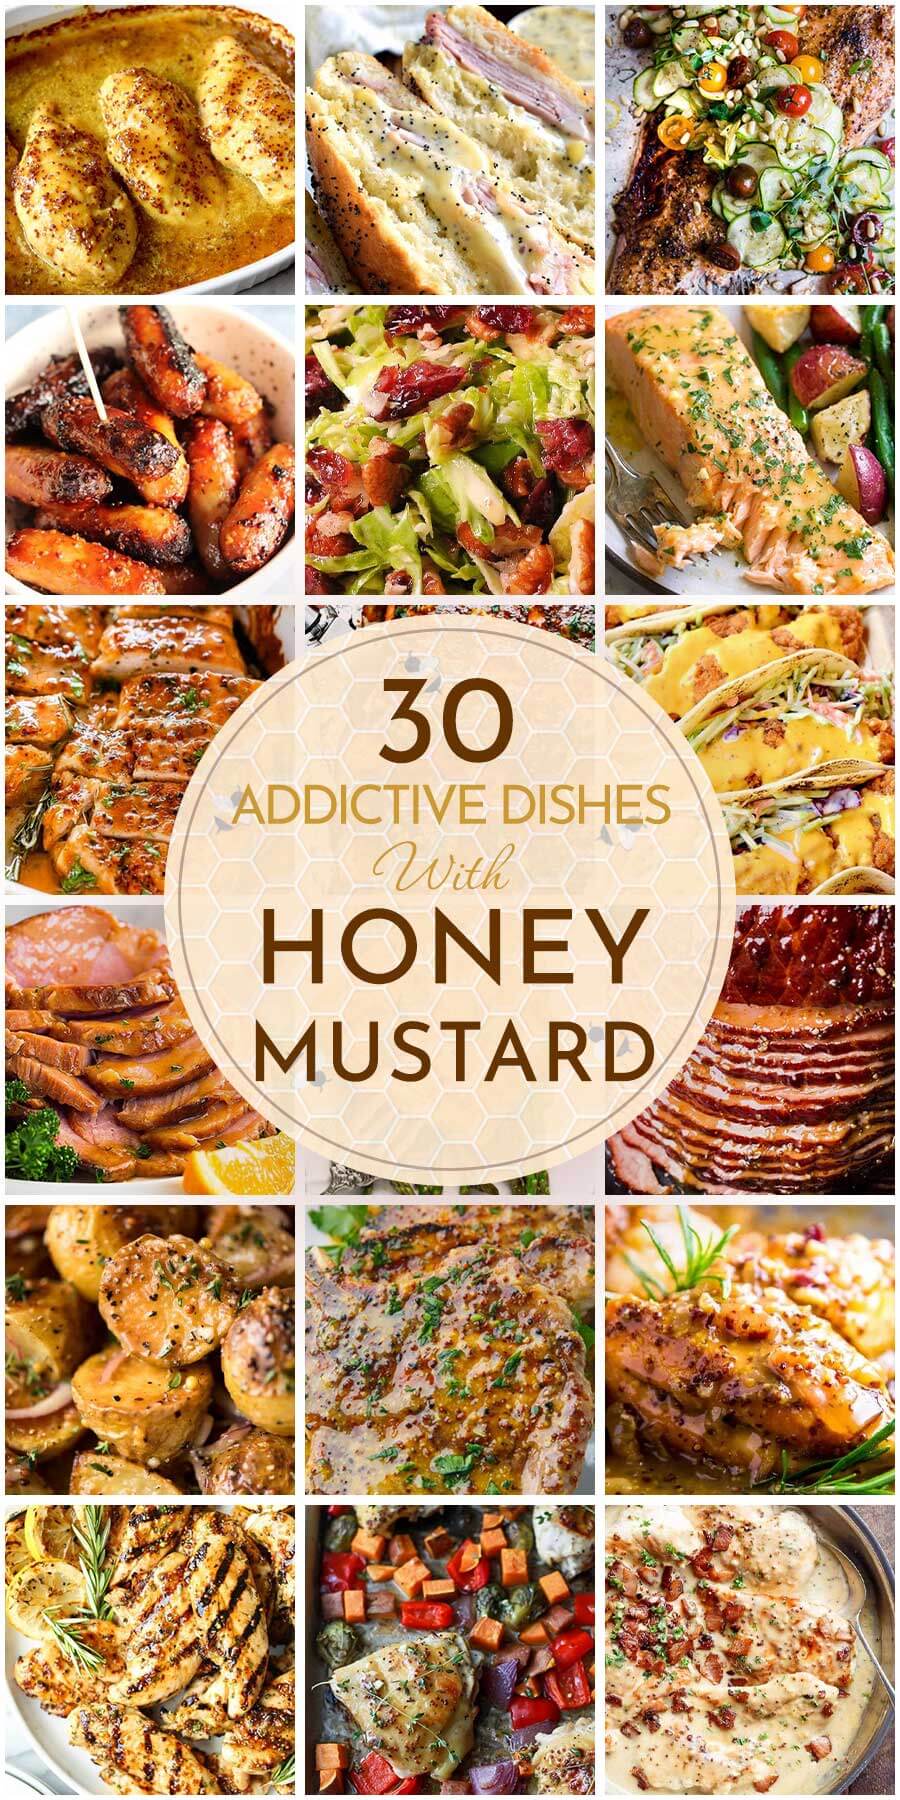 30 “Addictive” Dishes Made With Honey Mustard